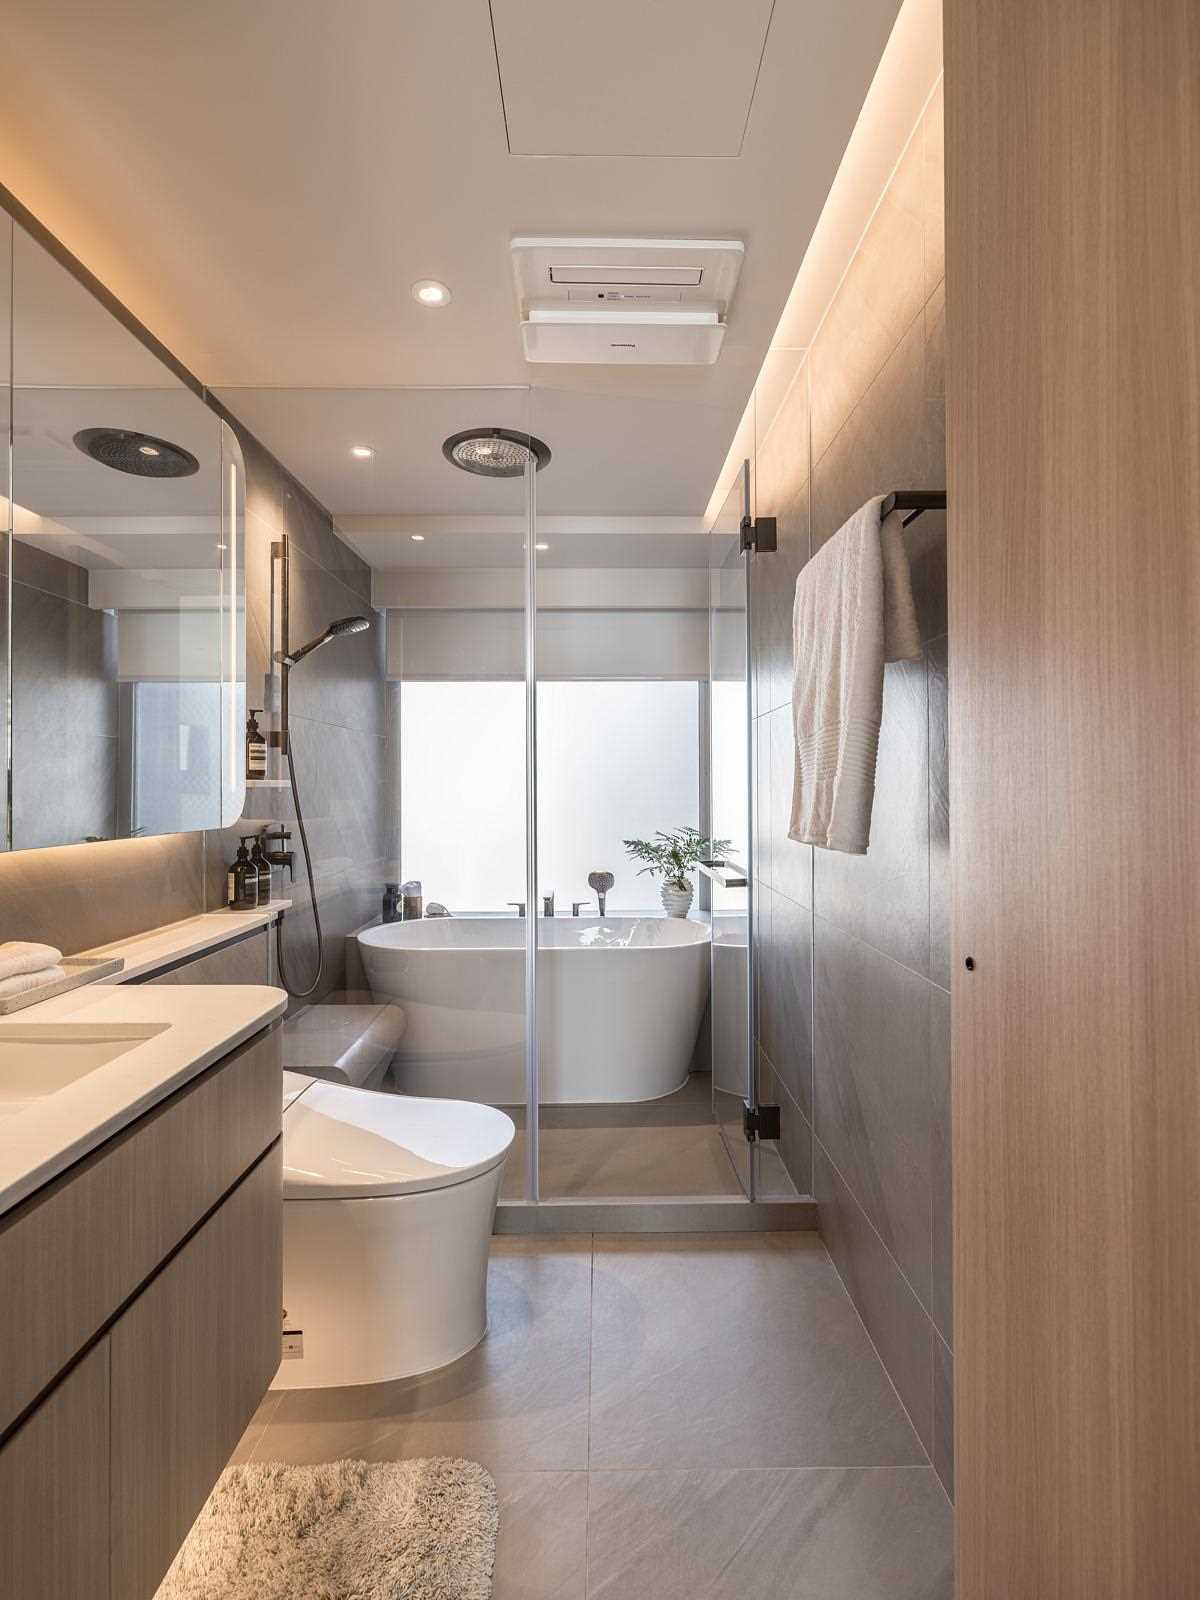 A primary bathroom with the bath and shower sharing the wet room.